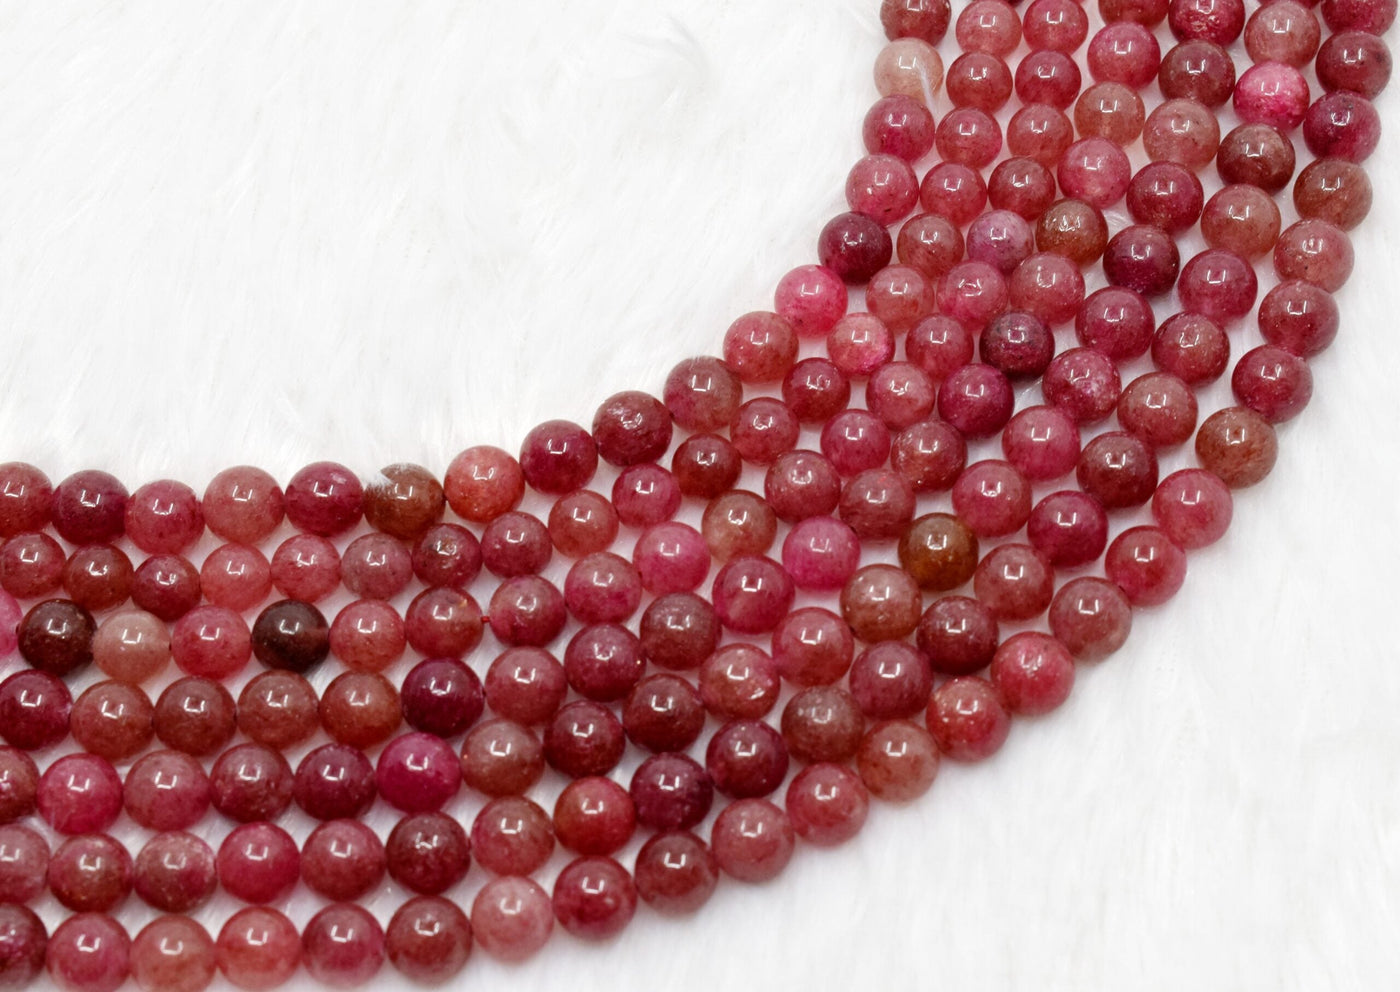 Strawberry Quartz Beads, Natural Round Crystal Beads 6mm to 10mm